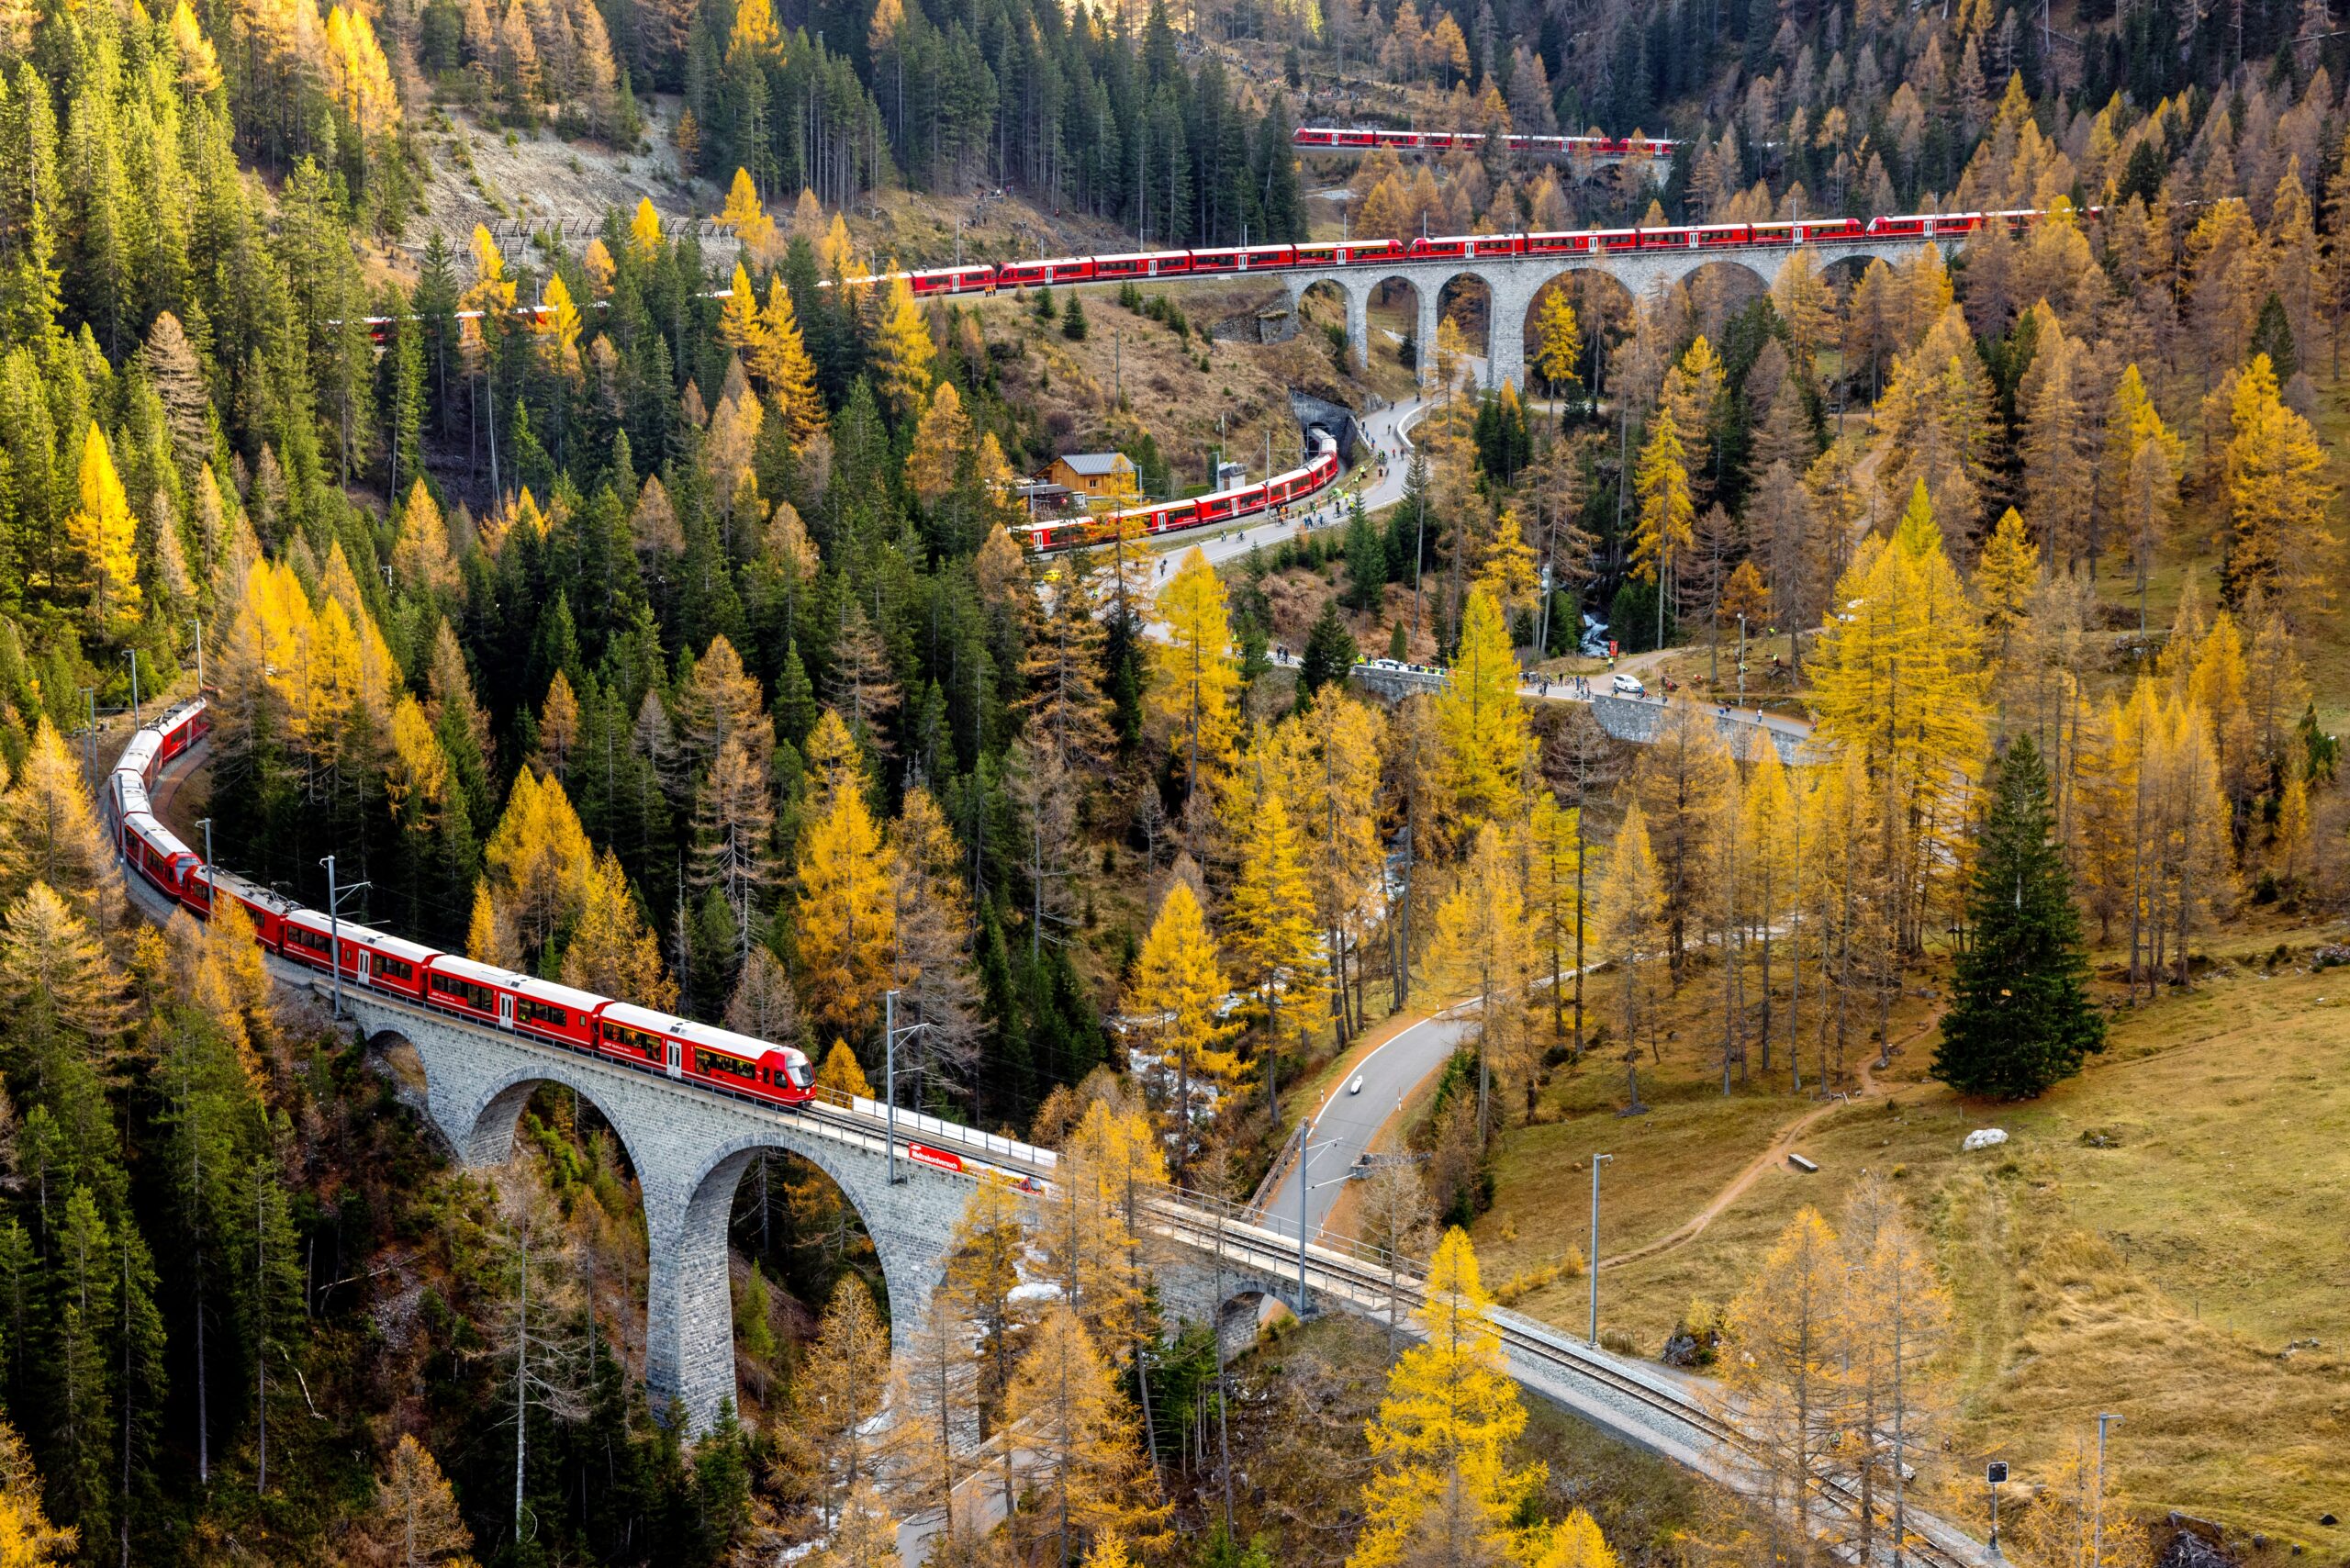 A 100-car RhB train while setting a world record in Switzerland on October 29, 2022